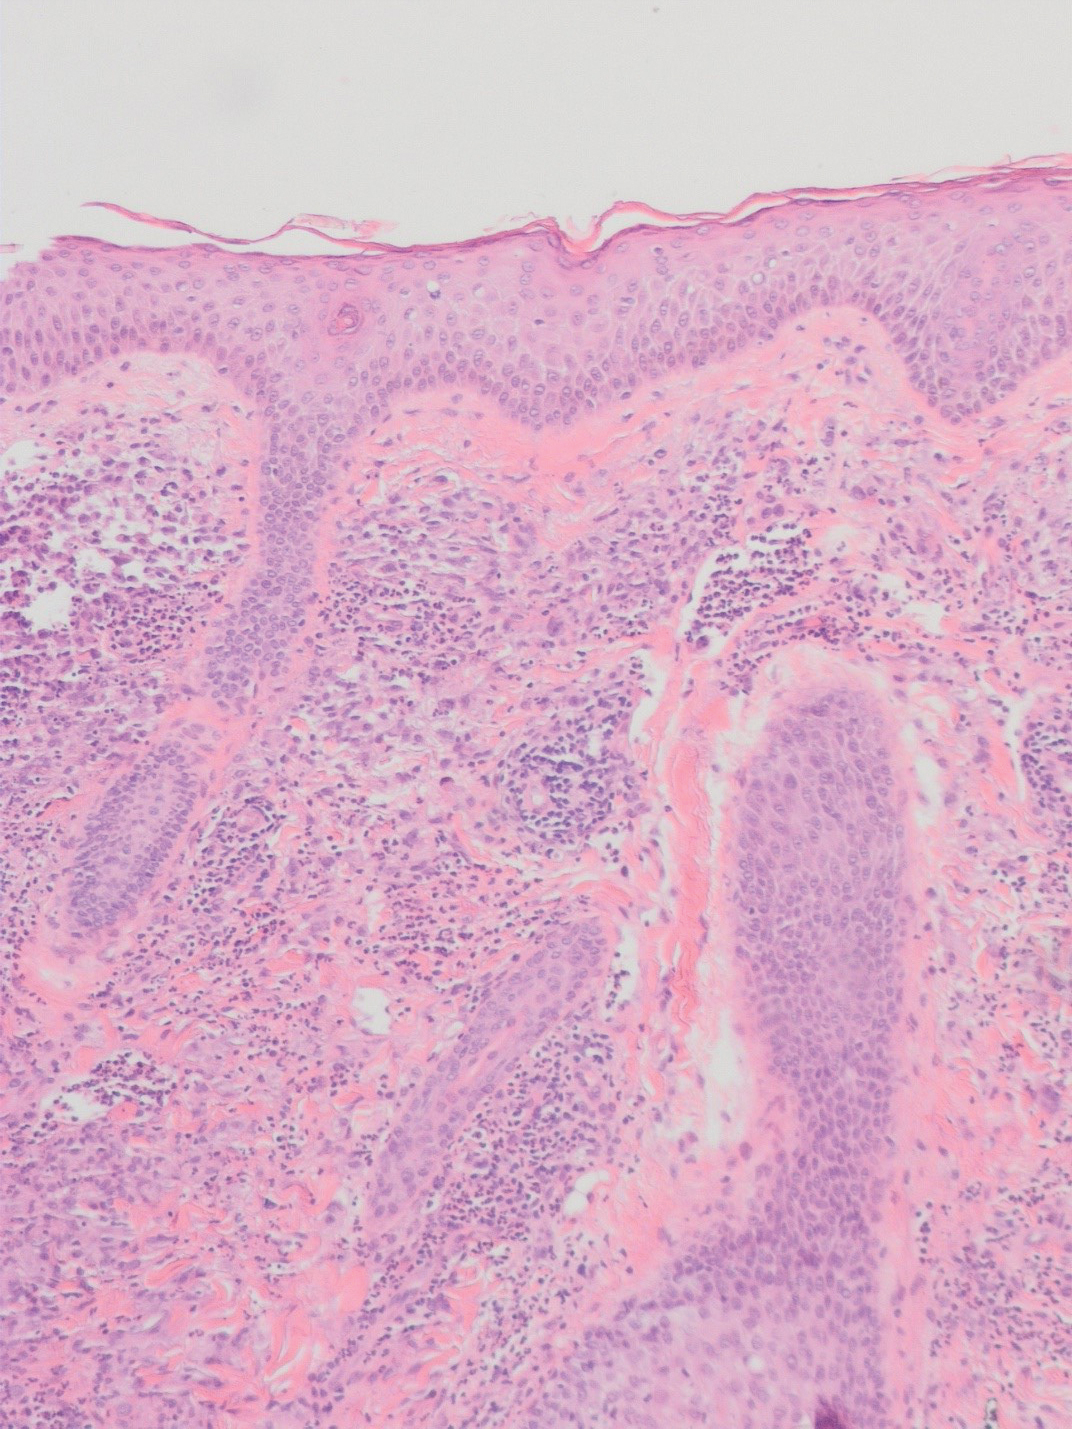 Histopathologic examination showed a diffuse, dense, mixed inflammatory cellular infiltrate with numerous neutrophils and eosinophils with leukocytoclasia, sparing the subepidermal area, forming a grenz zone